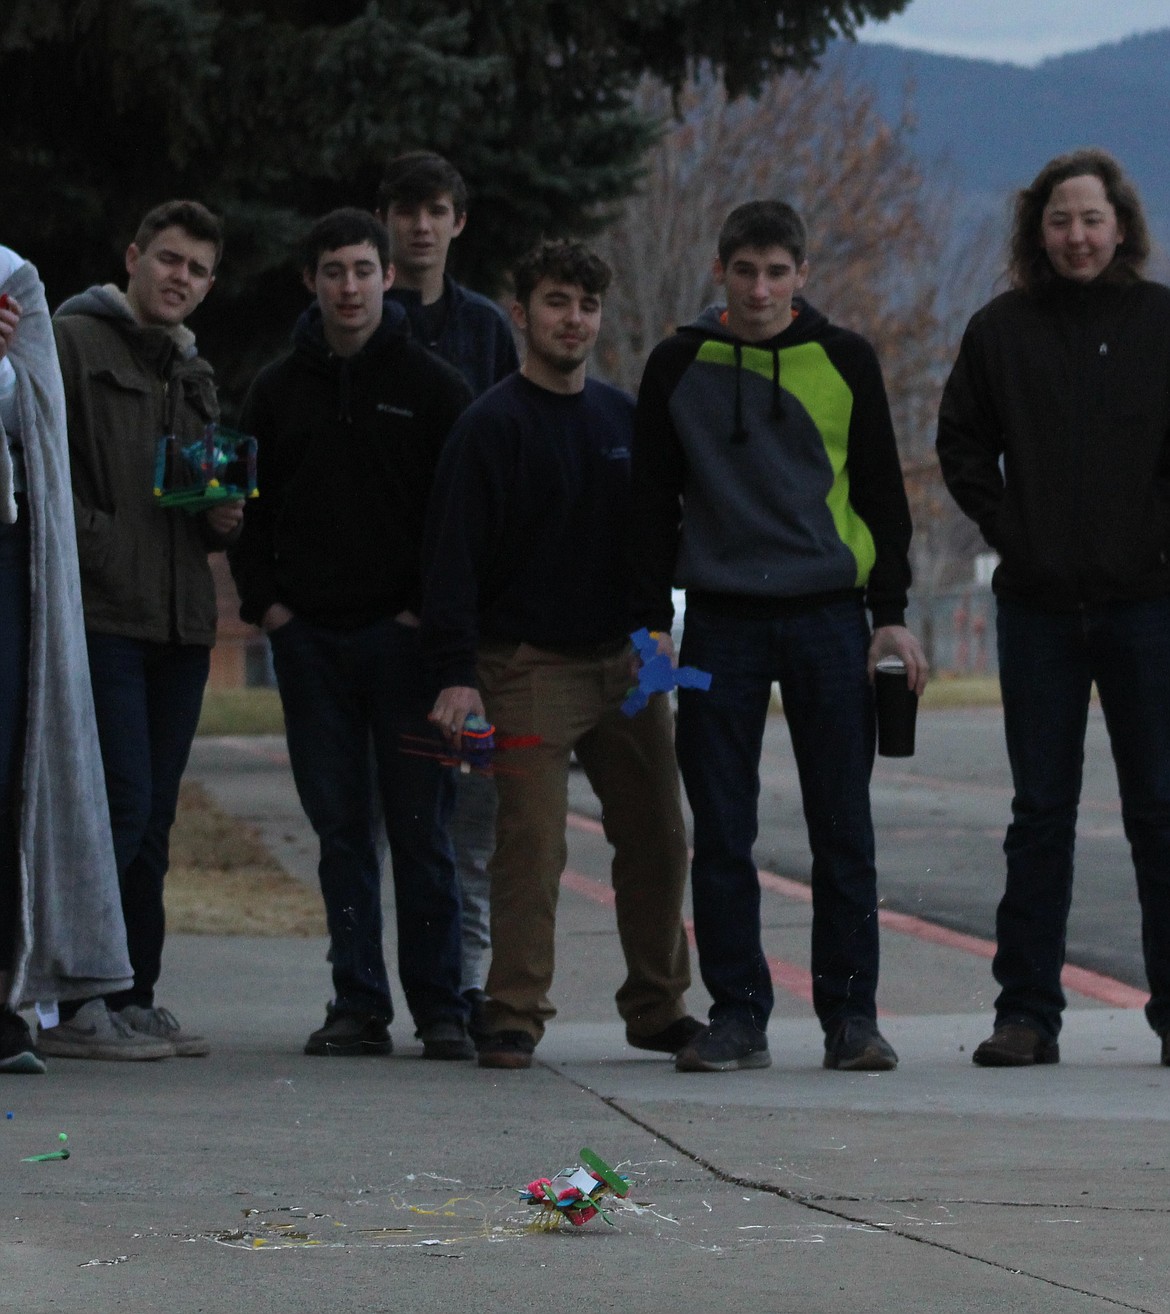 FROM LEFT to right, are Nathan McNulty, Andrew Harmon, Kade Pardee, Mason Gannarelli, Conrad Vanderwall, Wiley Scribner, watch one of the devices as it fails to protect an egg as it landed on the concrete. (John Dowd/Clark Fork Valley Press)